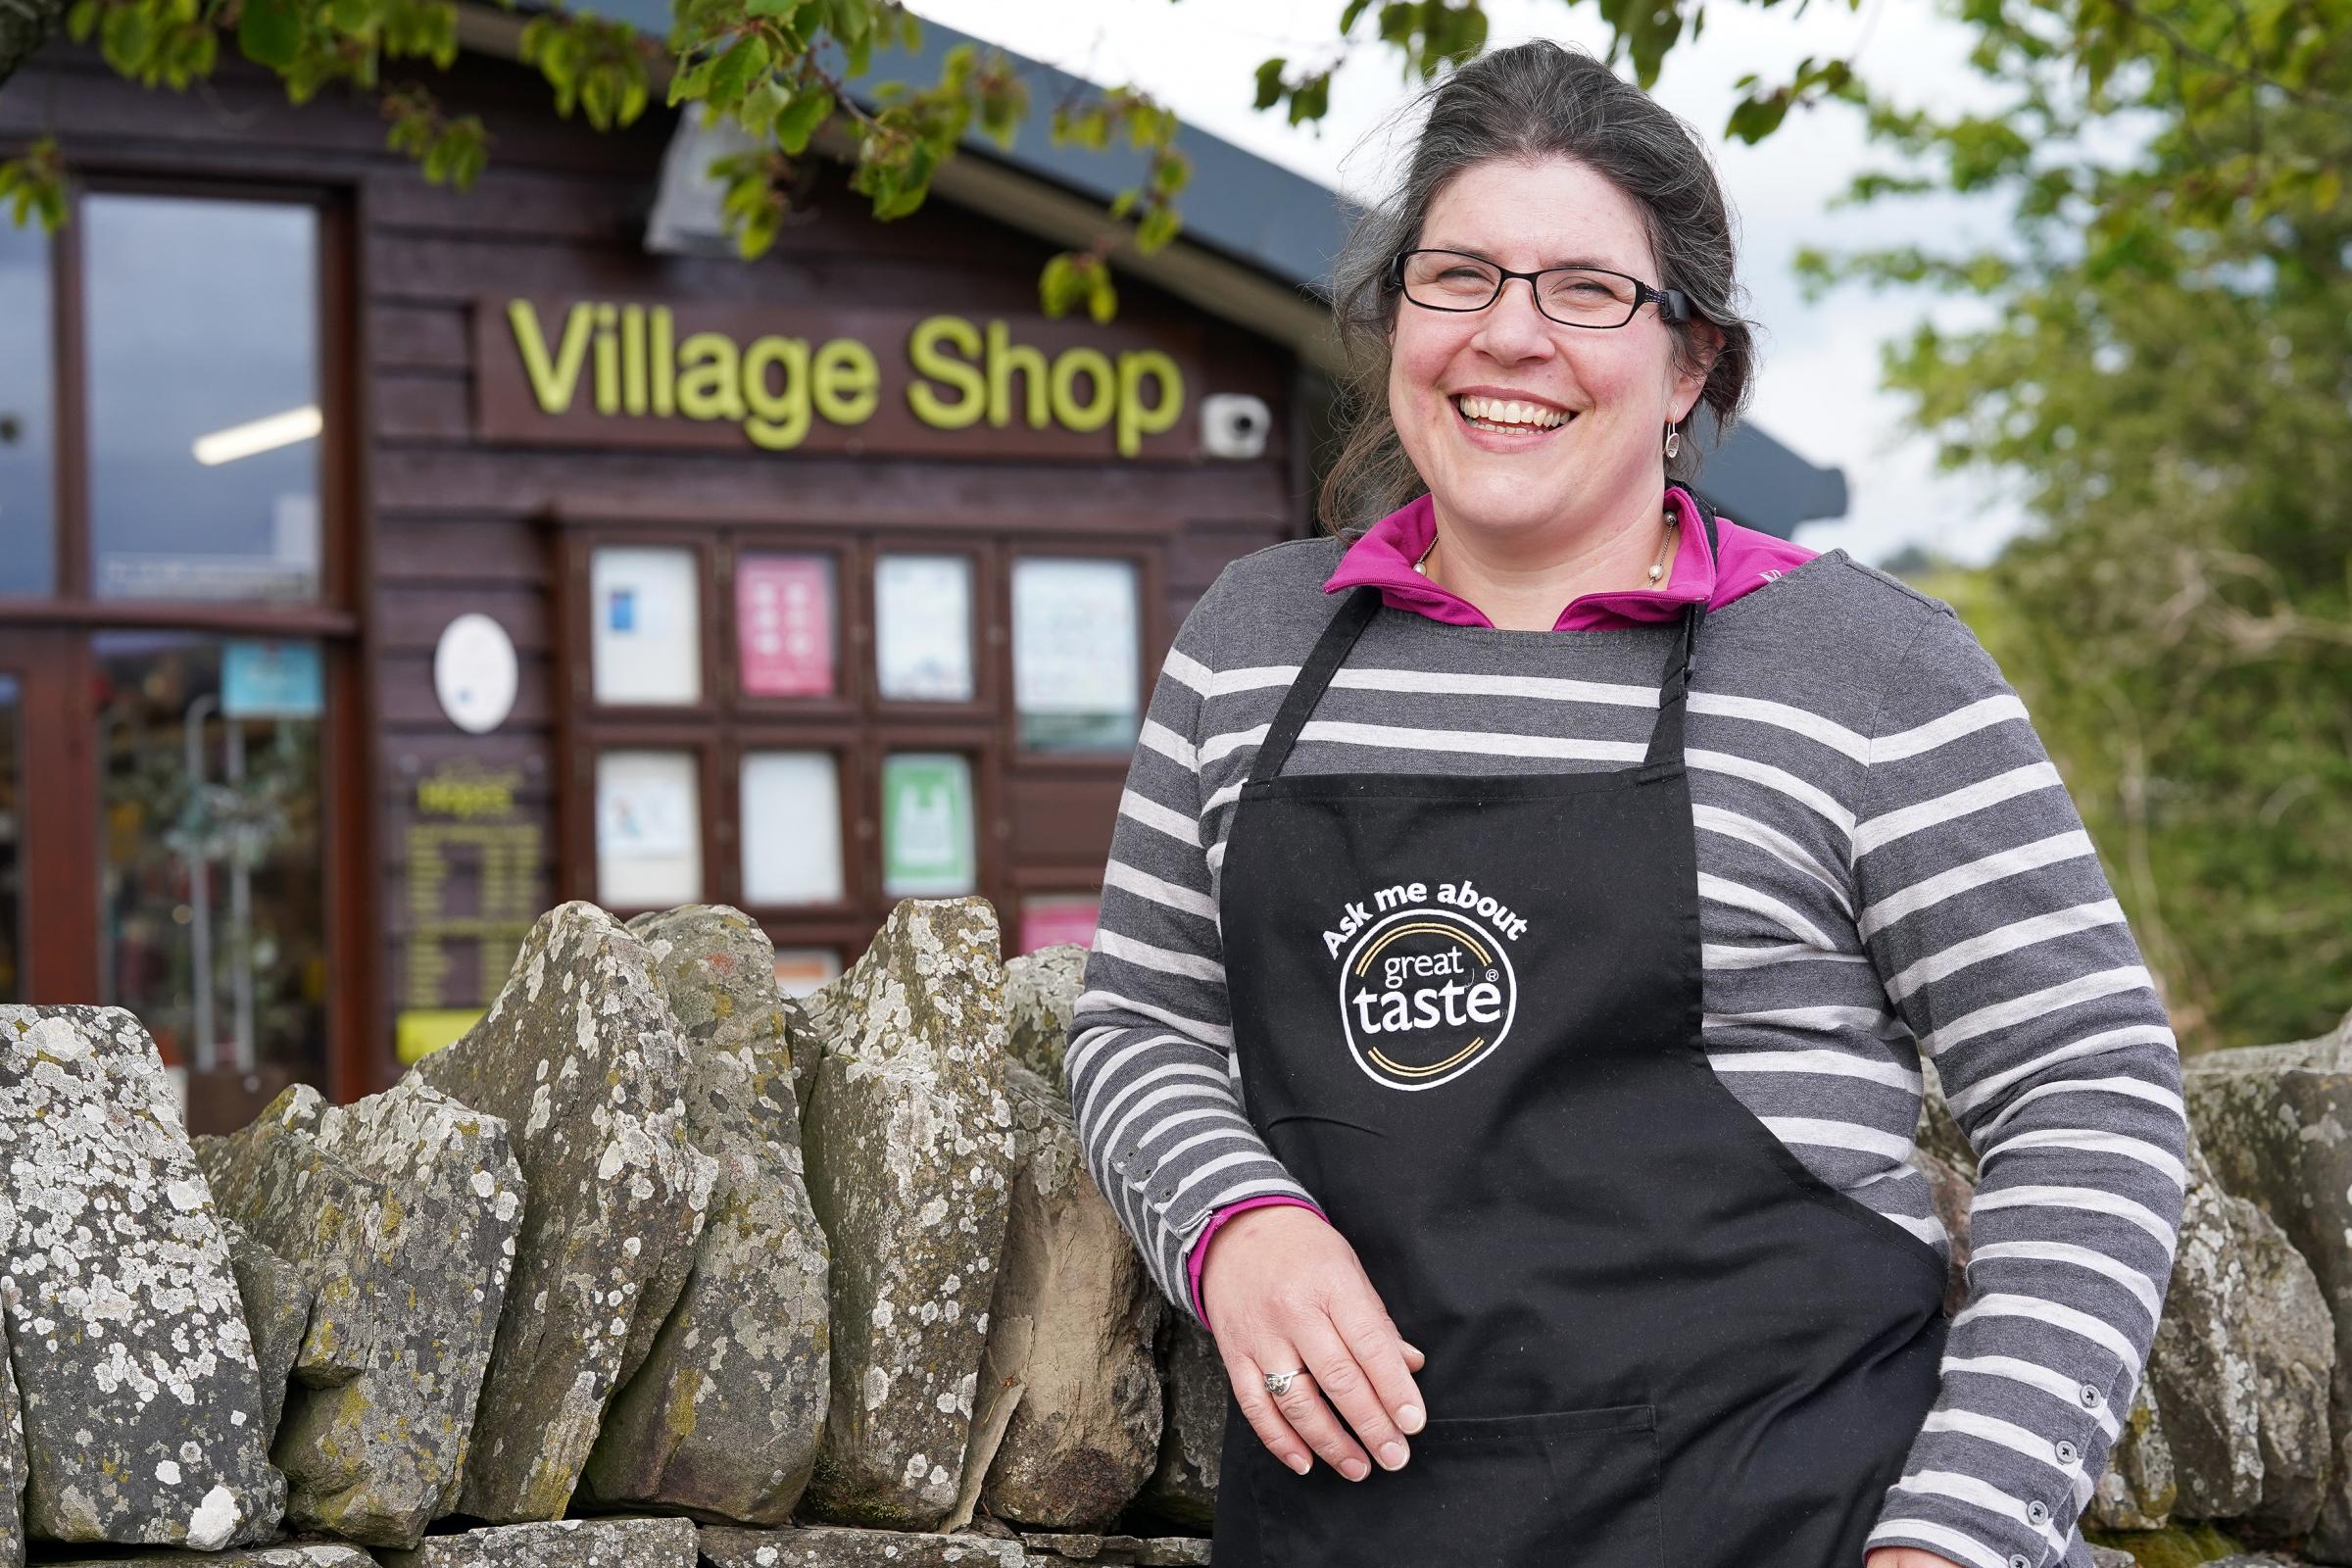 Hopes of Longtown, run by Christine Hope, has hit the top 100 UK convenience shops for sixth consecutive year